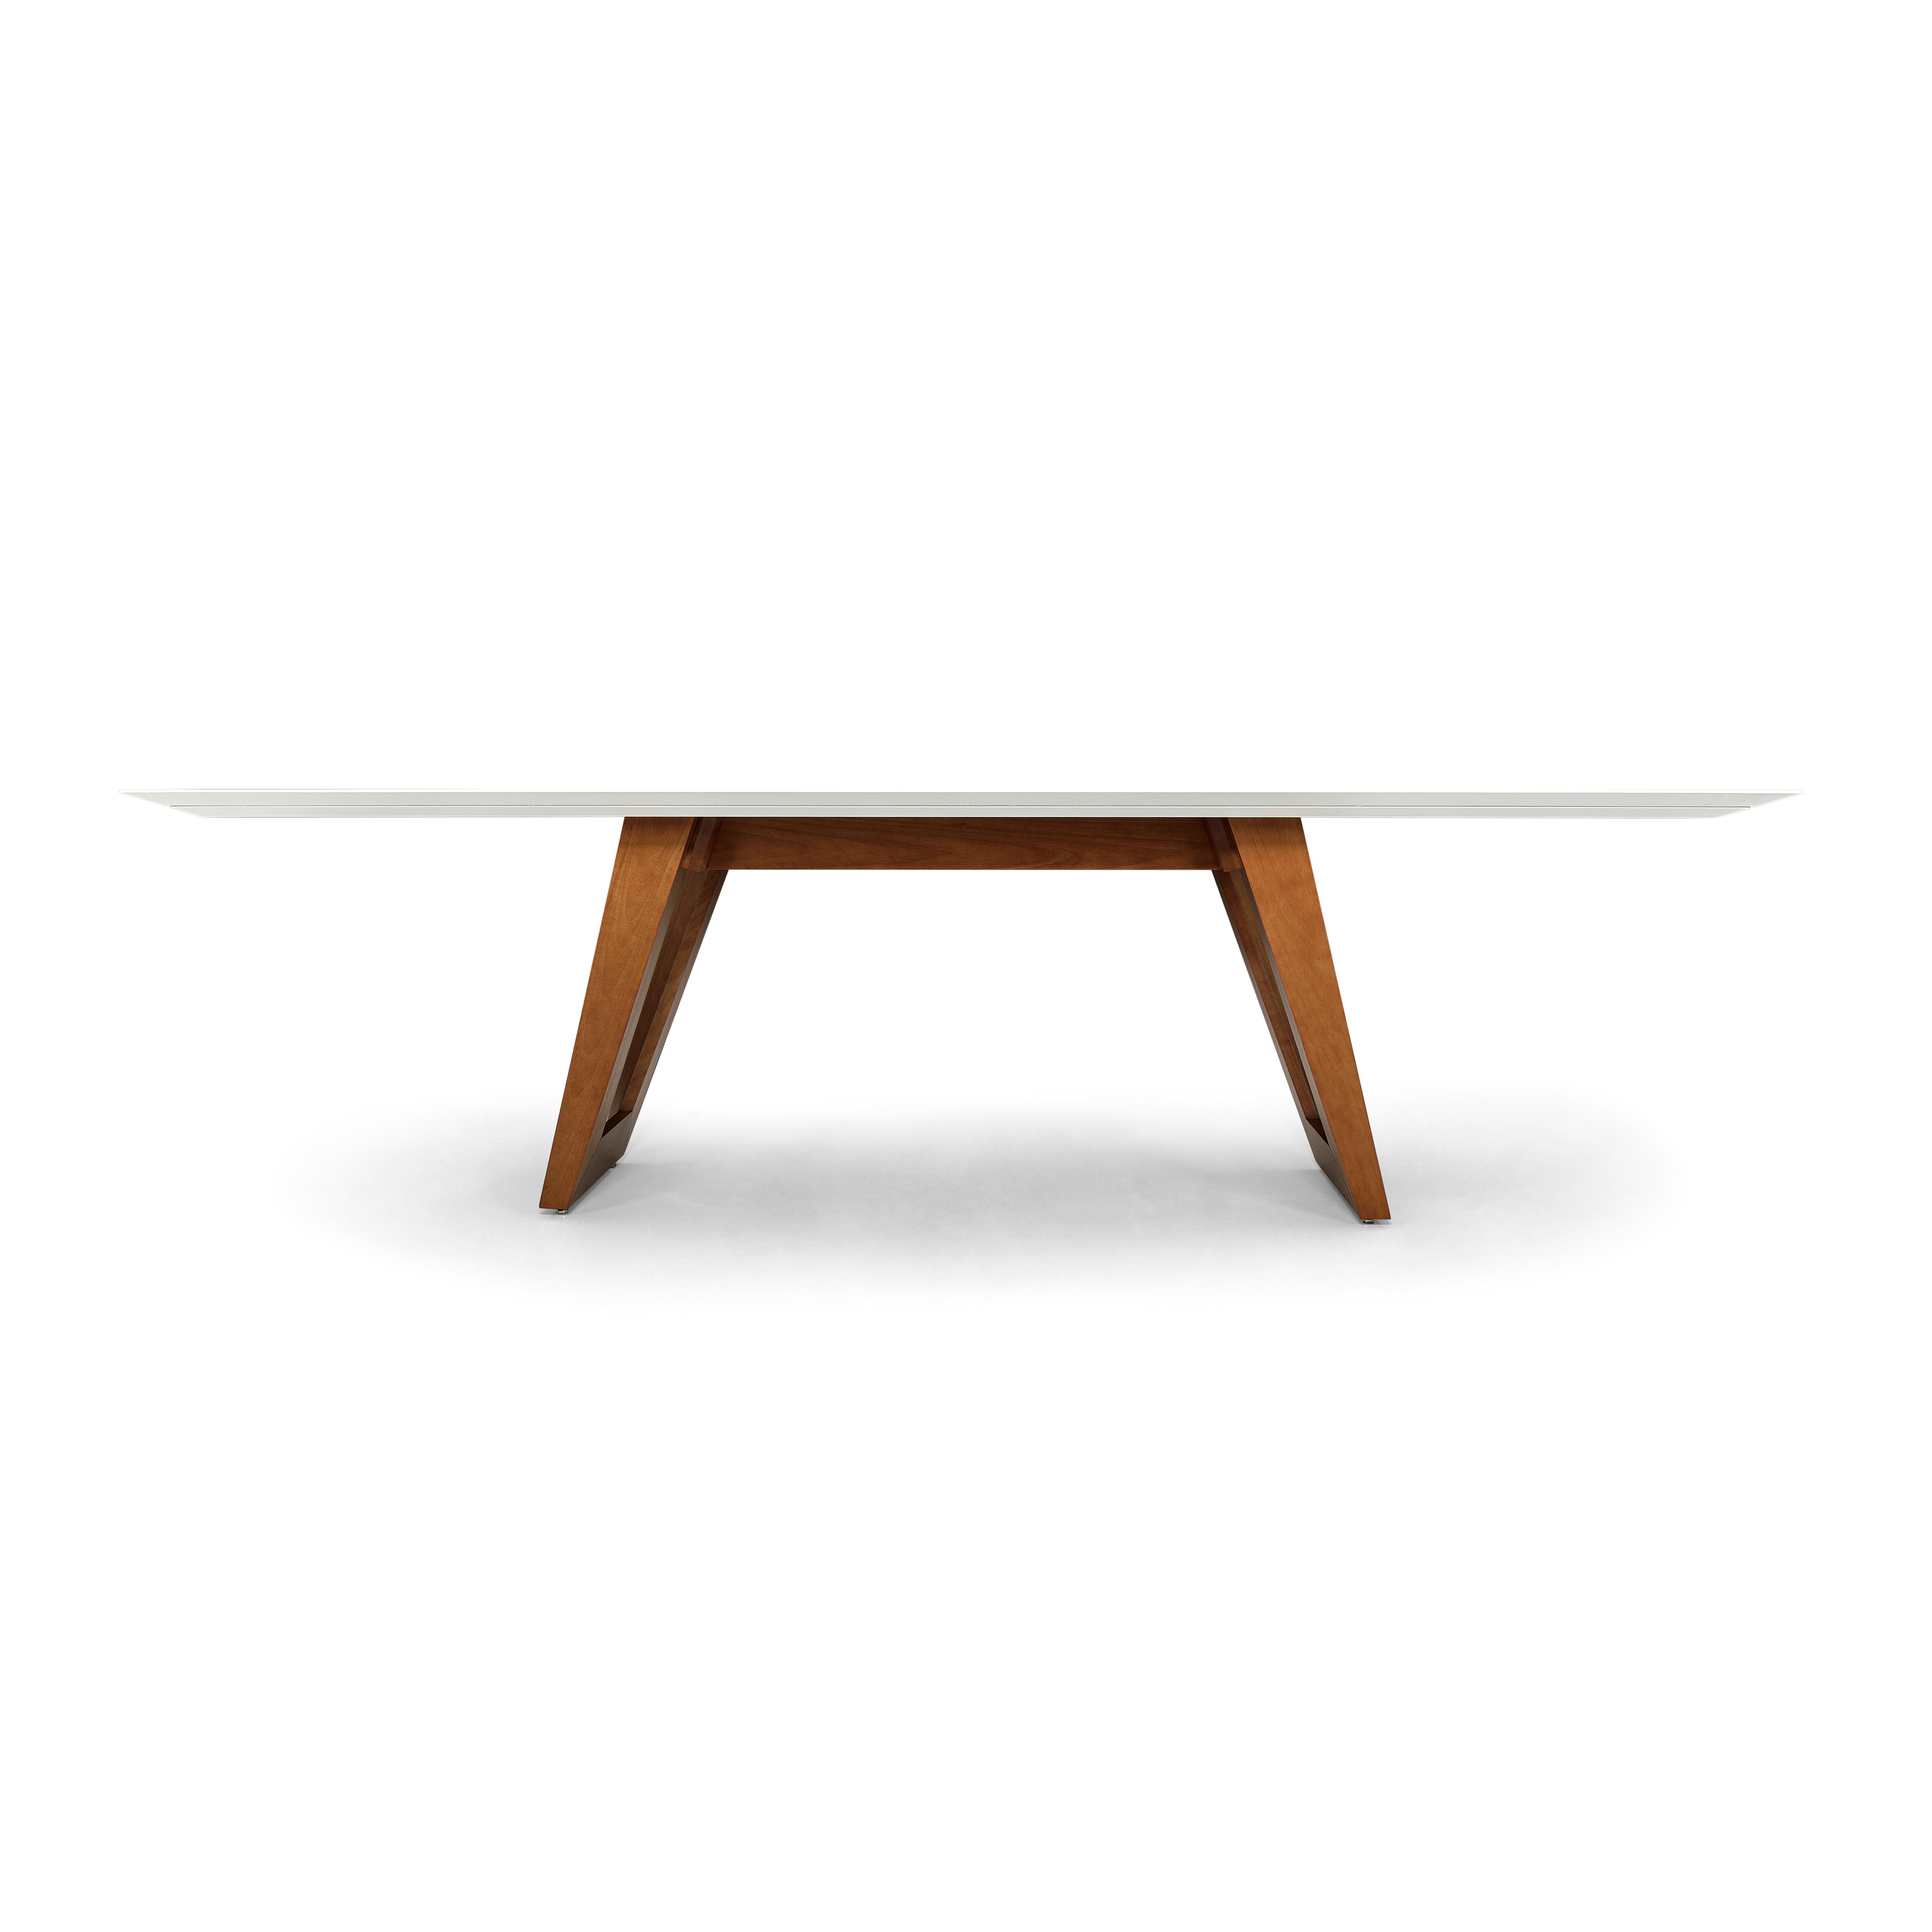 The Letto table has a beautiful chamfered white oak top that shows off the very best of what our Uultis designers have to offer. This beautiful top is combined with a perfectly designed solid wook in Oak base and will quickly become the statement